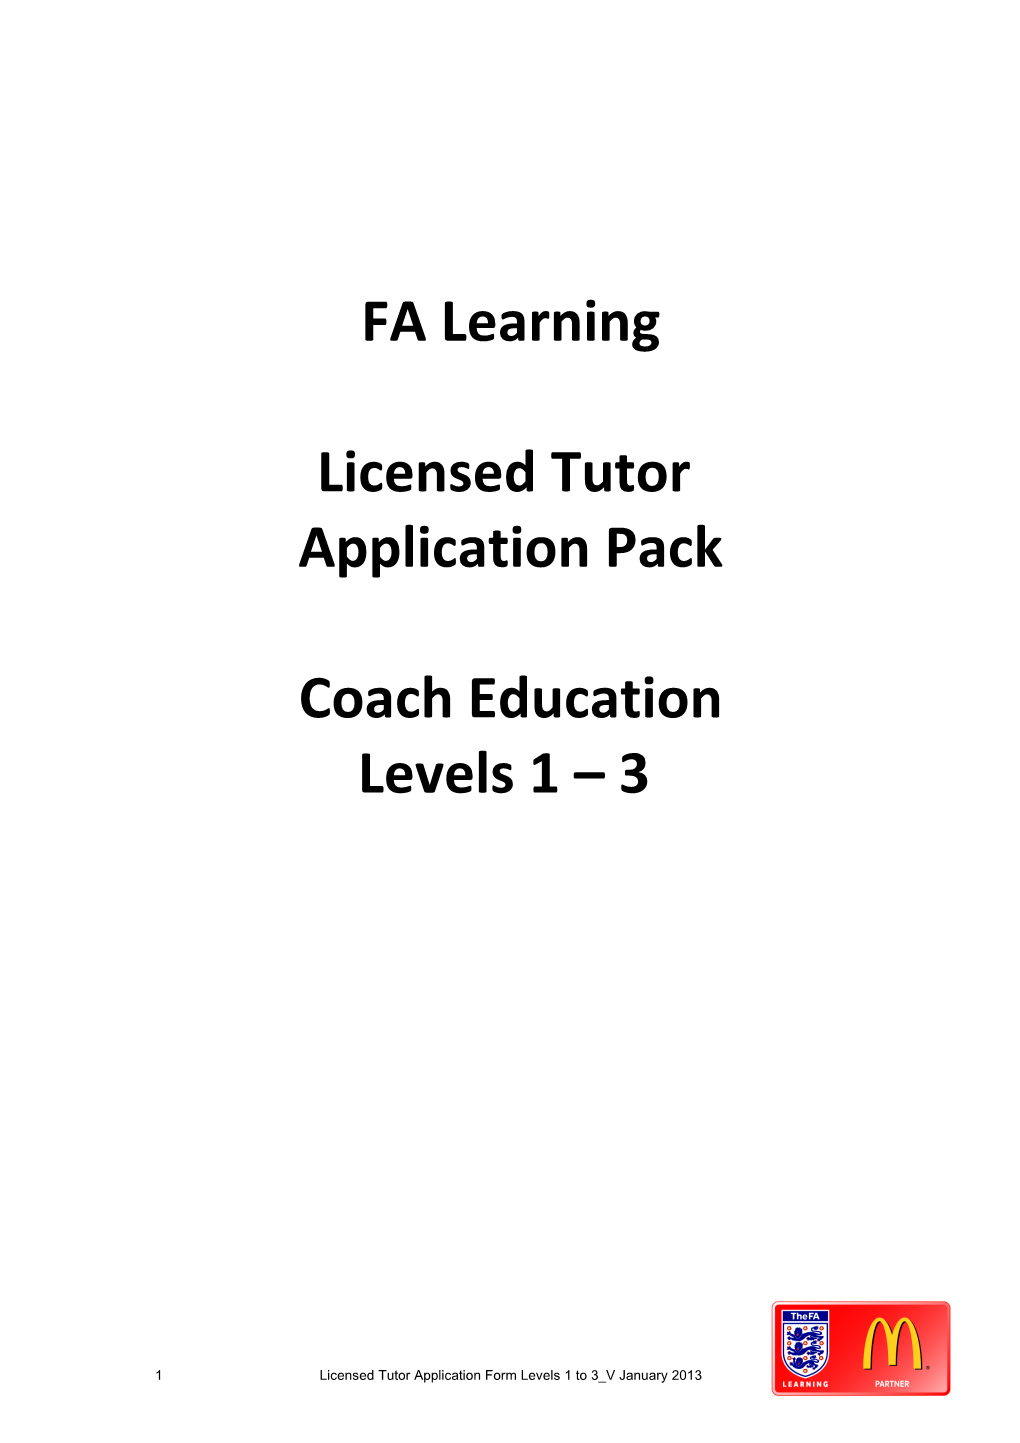 FA Learning (FAL) Licensed Tutor Application Pack Levels 1 to 3